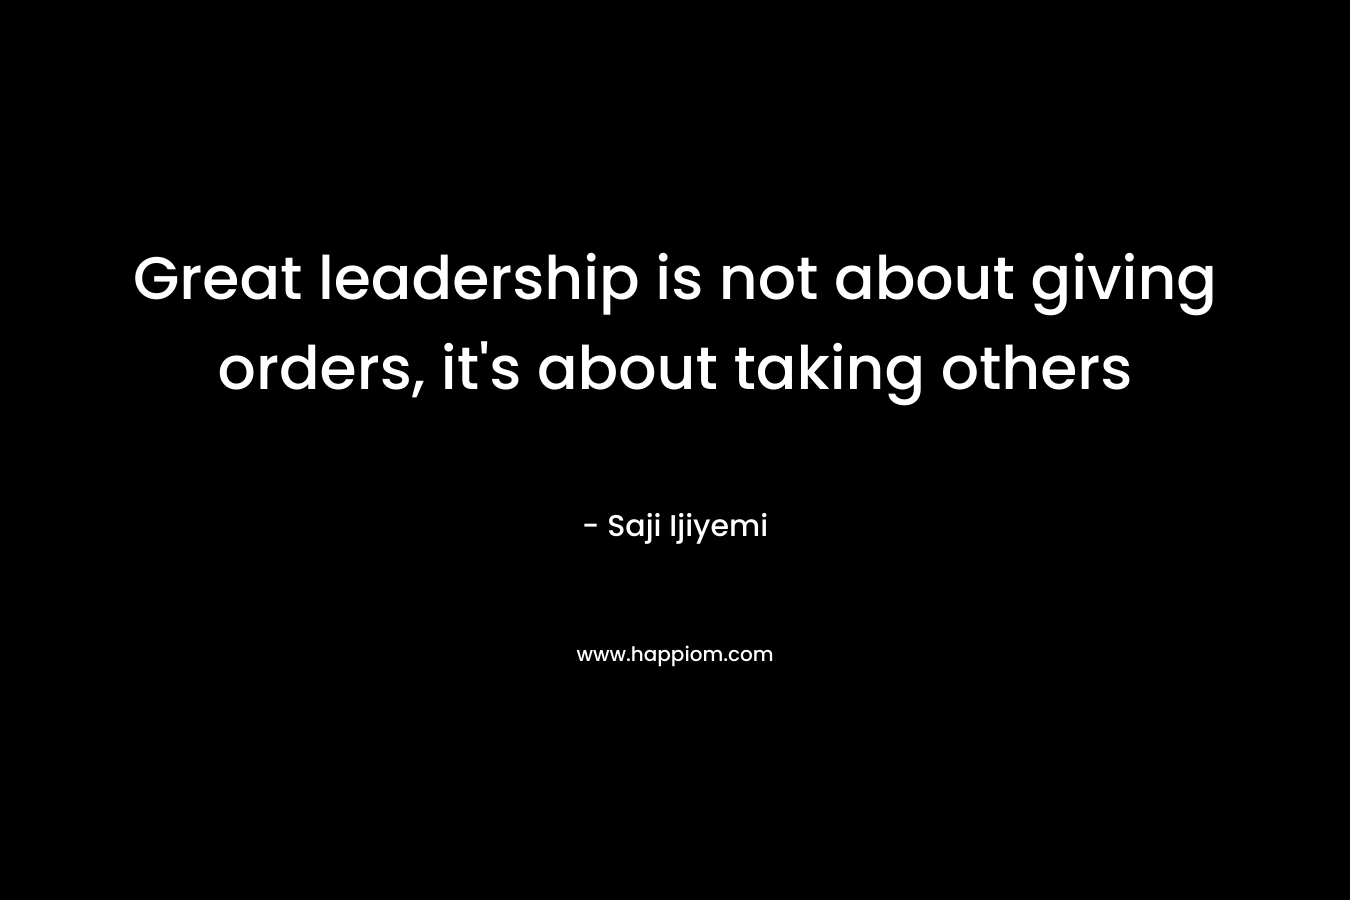 Great leadership is not about giving orders, it’s about taking others – Saji Ijiyemi